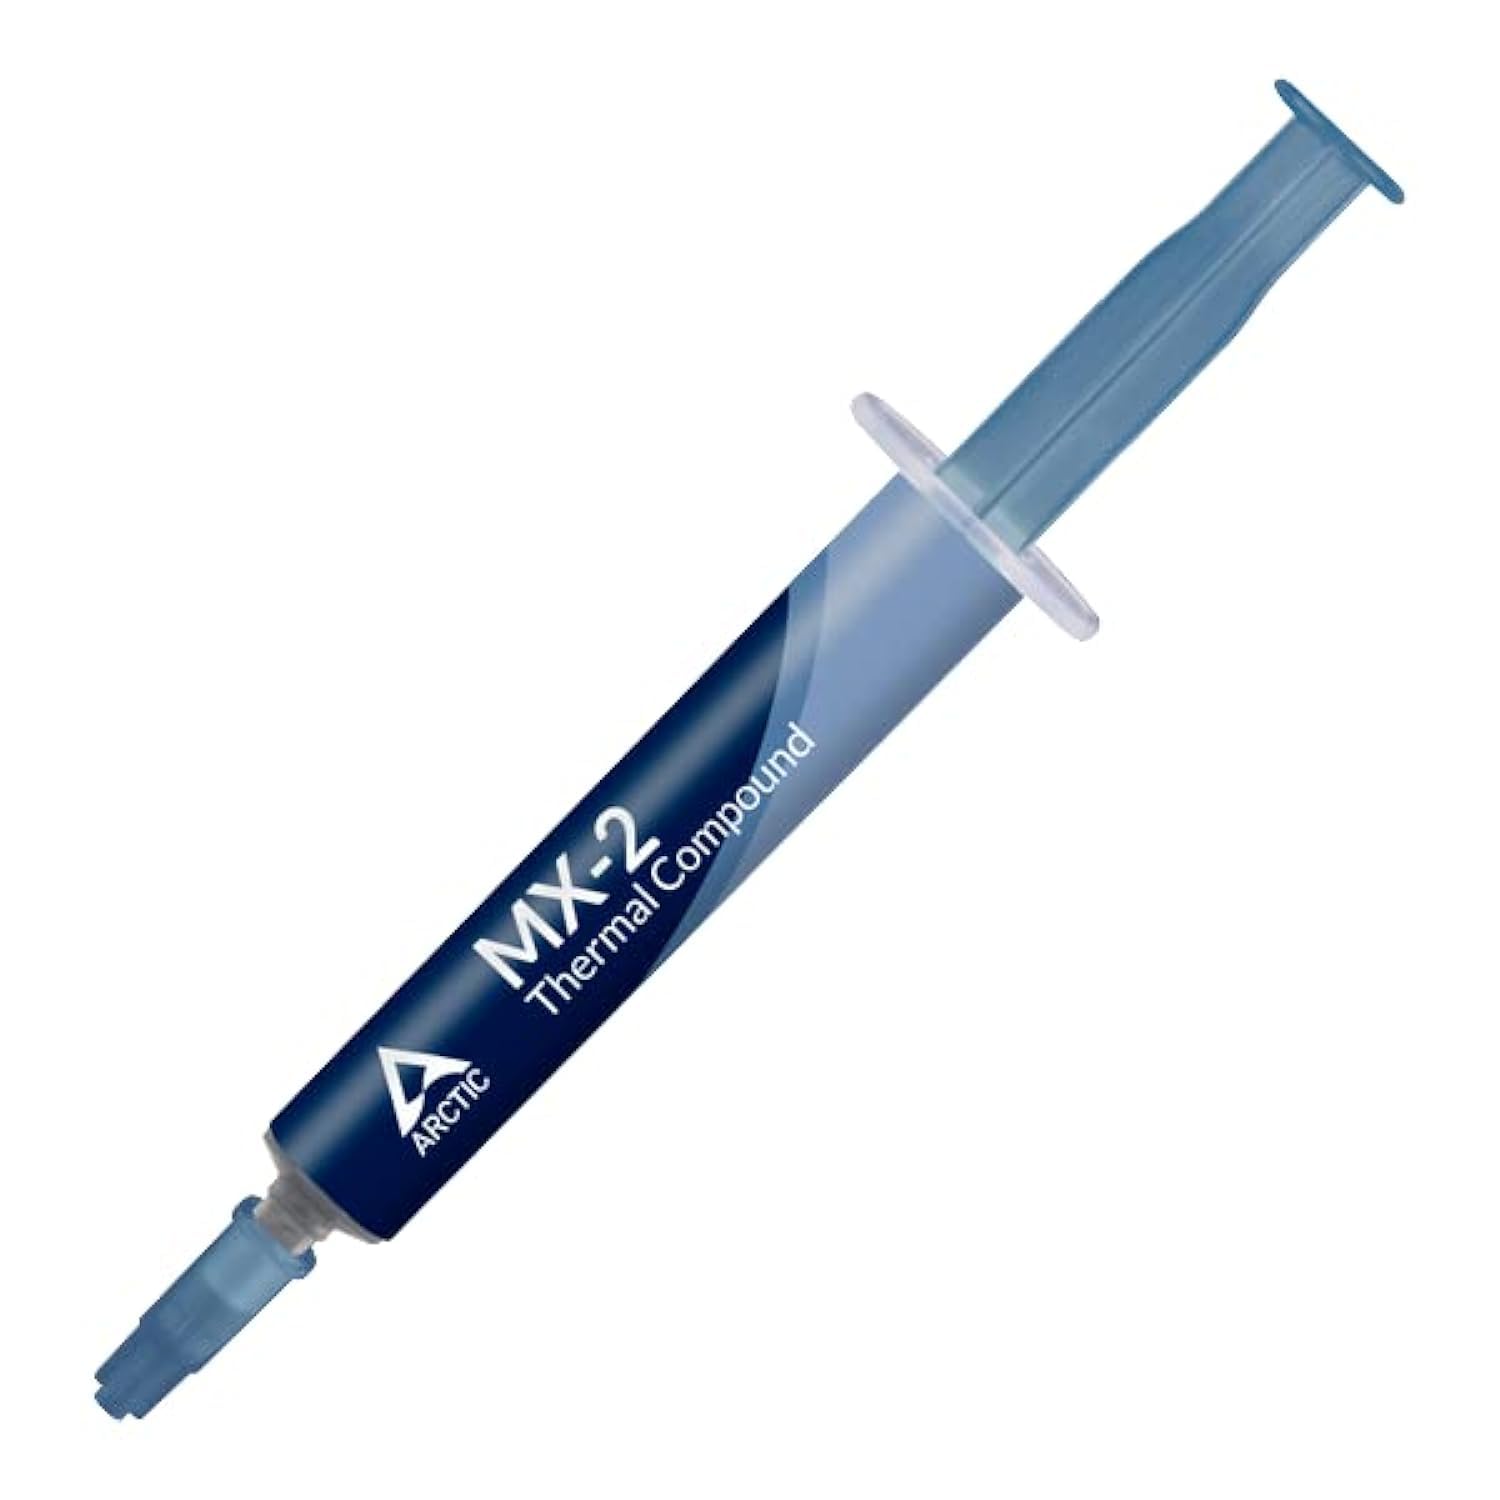 ARCTIC MX-2 (4 g) - Performance Thermal Paste for All Processors (CPU, GPU - PC, PS4, Xbox), high Thermal Conductivity, Safe Application, Non-Conductive, Non-capacitive